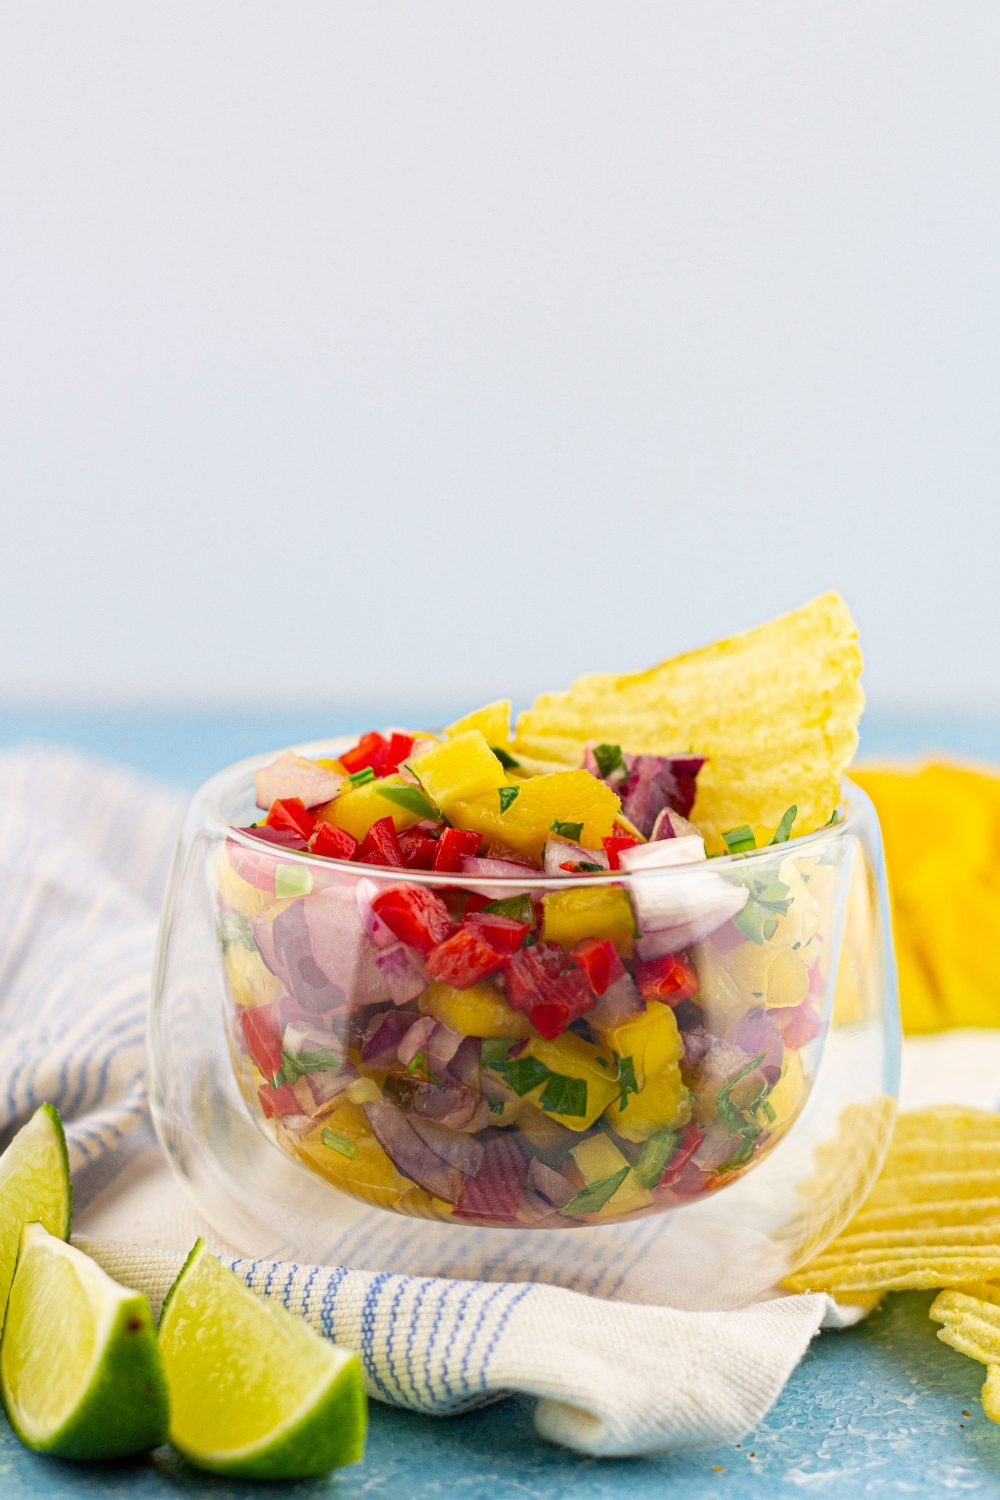 Mango Habanero Salsa in a glass bowl with a chip